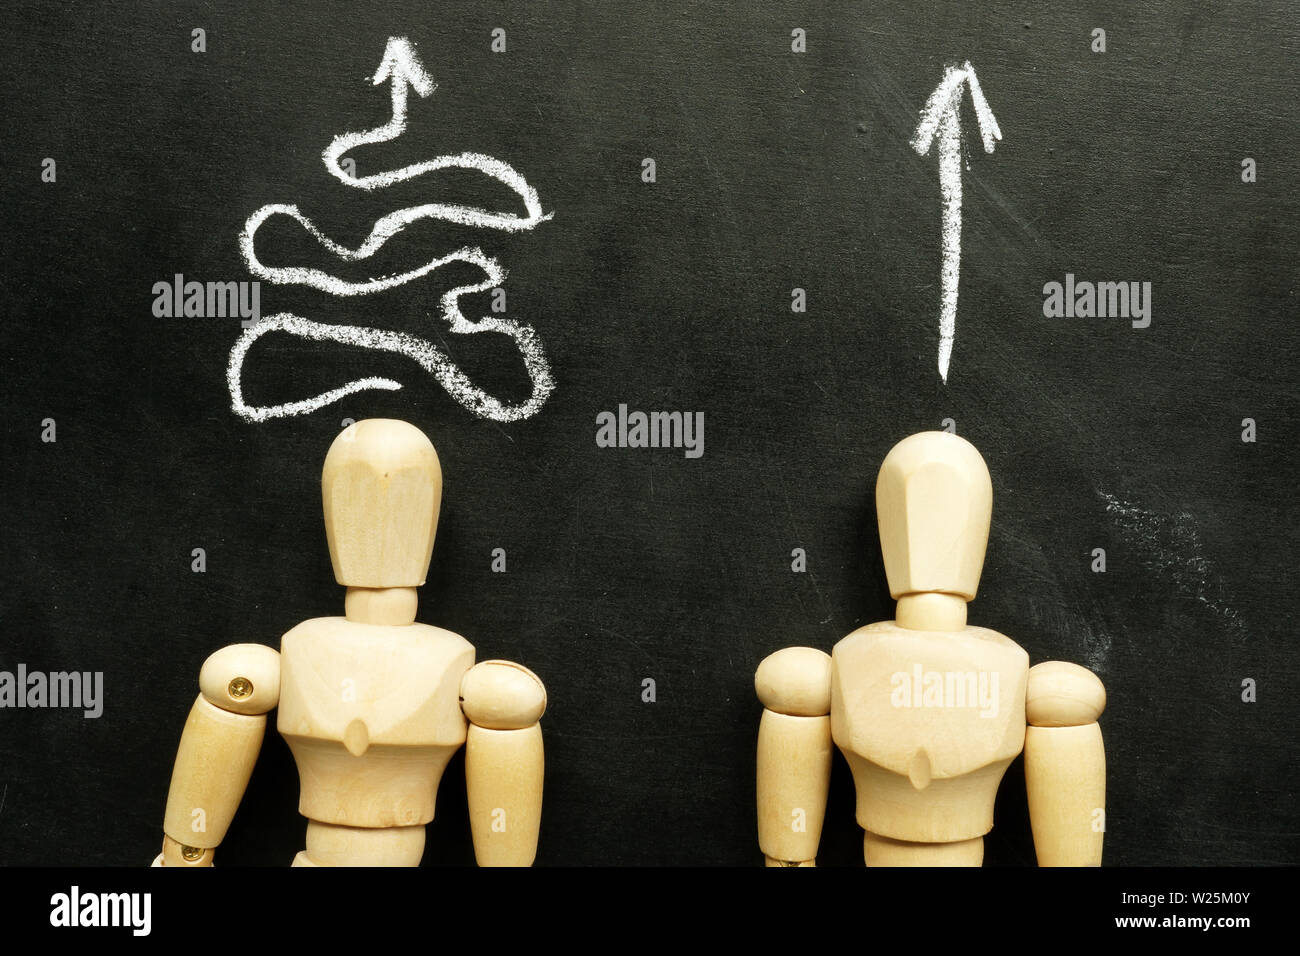 Types of problems solving and thinking a solution. Figurines and arrows. Stock Photo